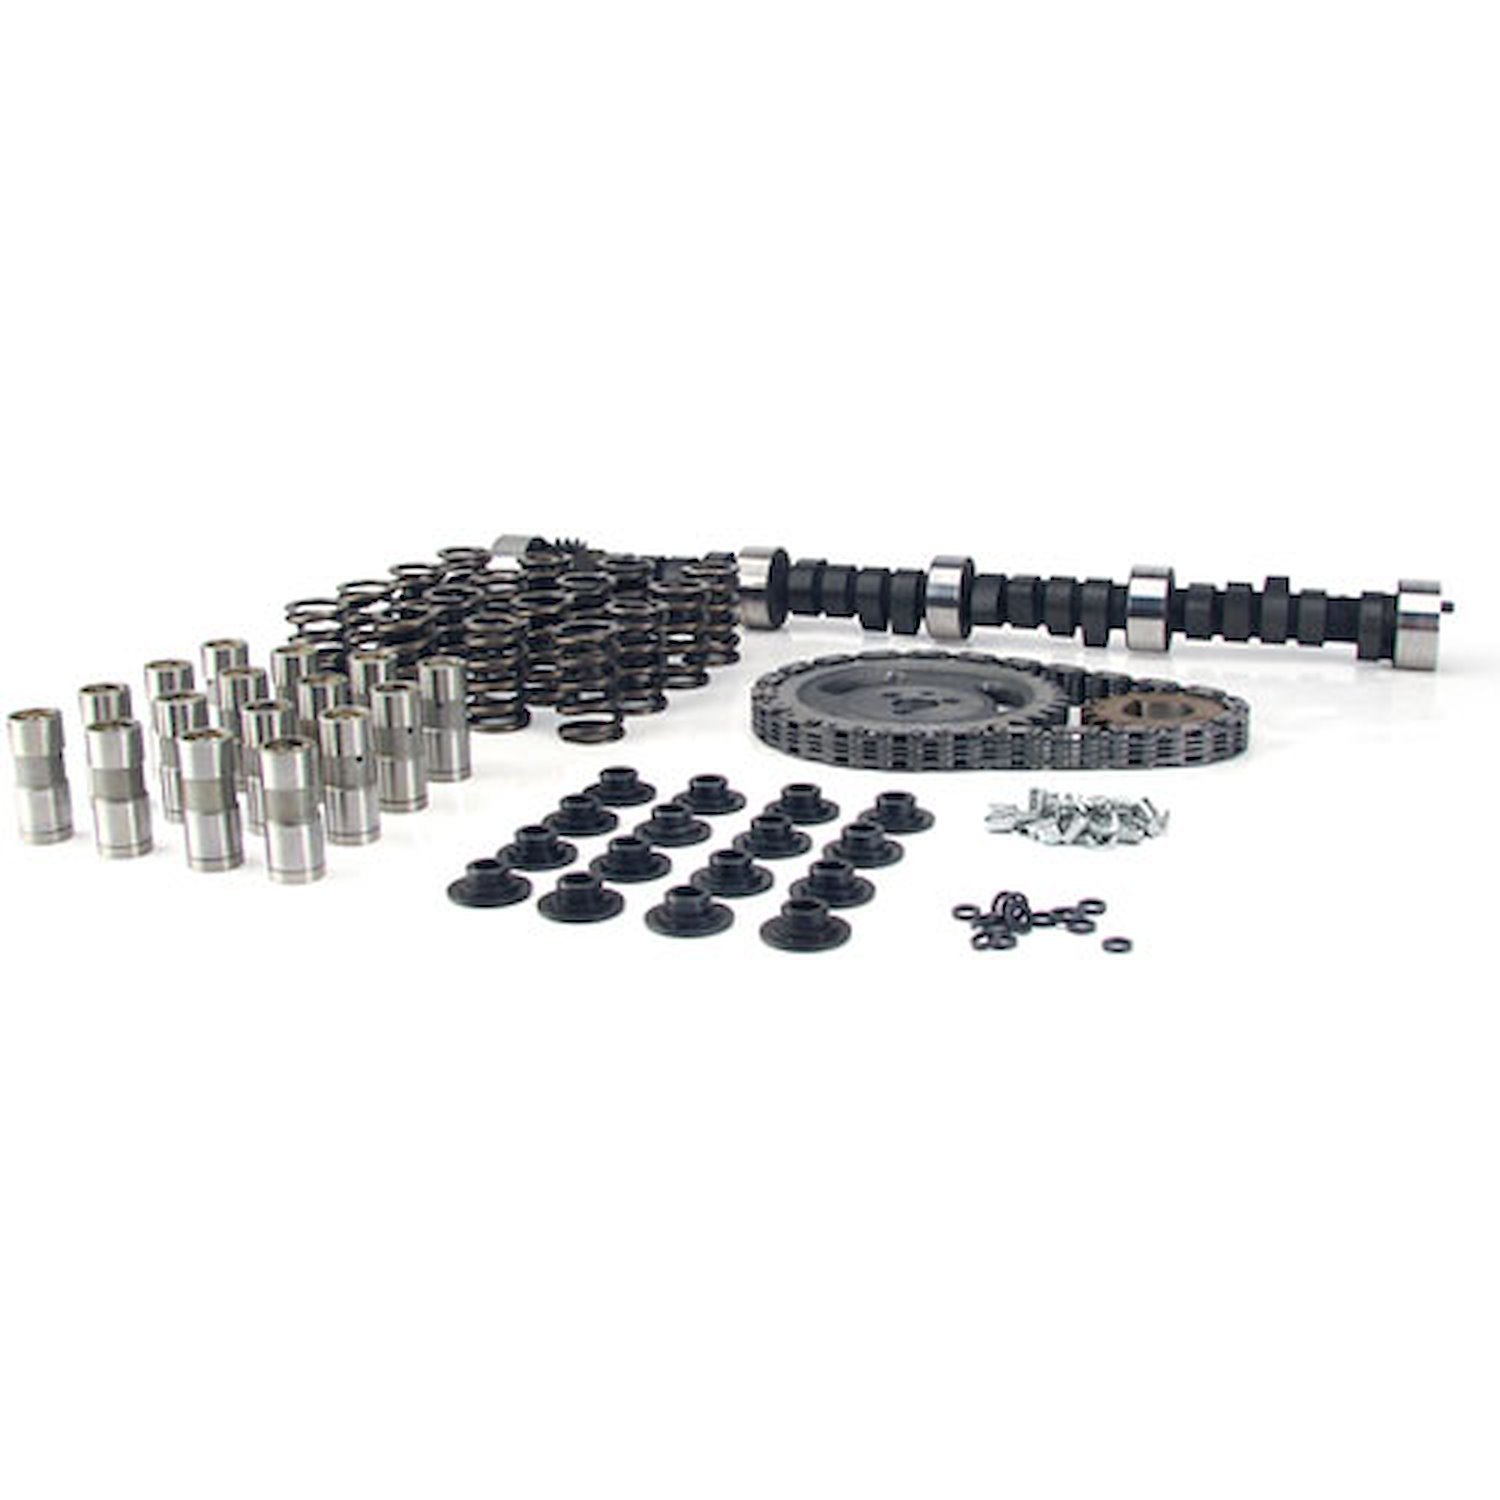 Xtreme Energy 274H Hydraulic Flat Tappet Camshaft Complete Kit Lift: .552"/.555" Duration: 274°/286° RPM Range: 1800-6000